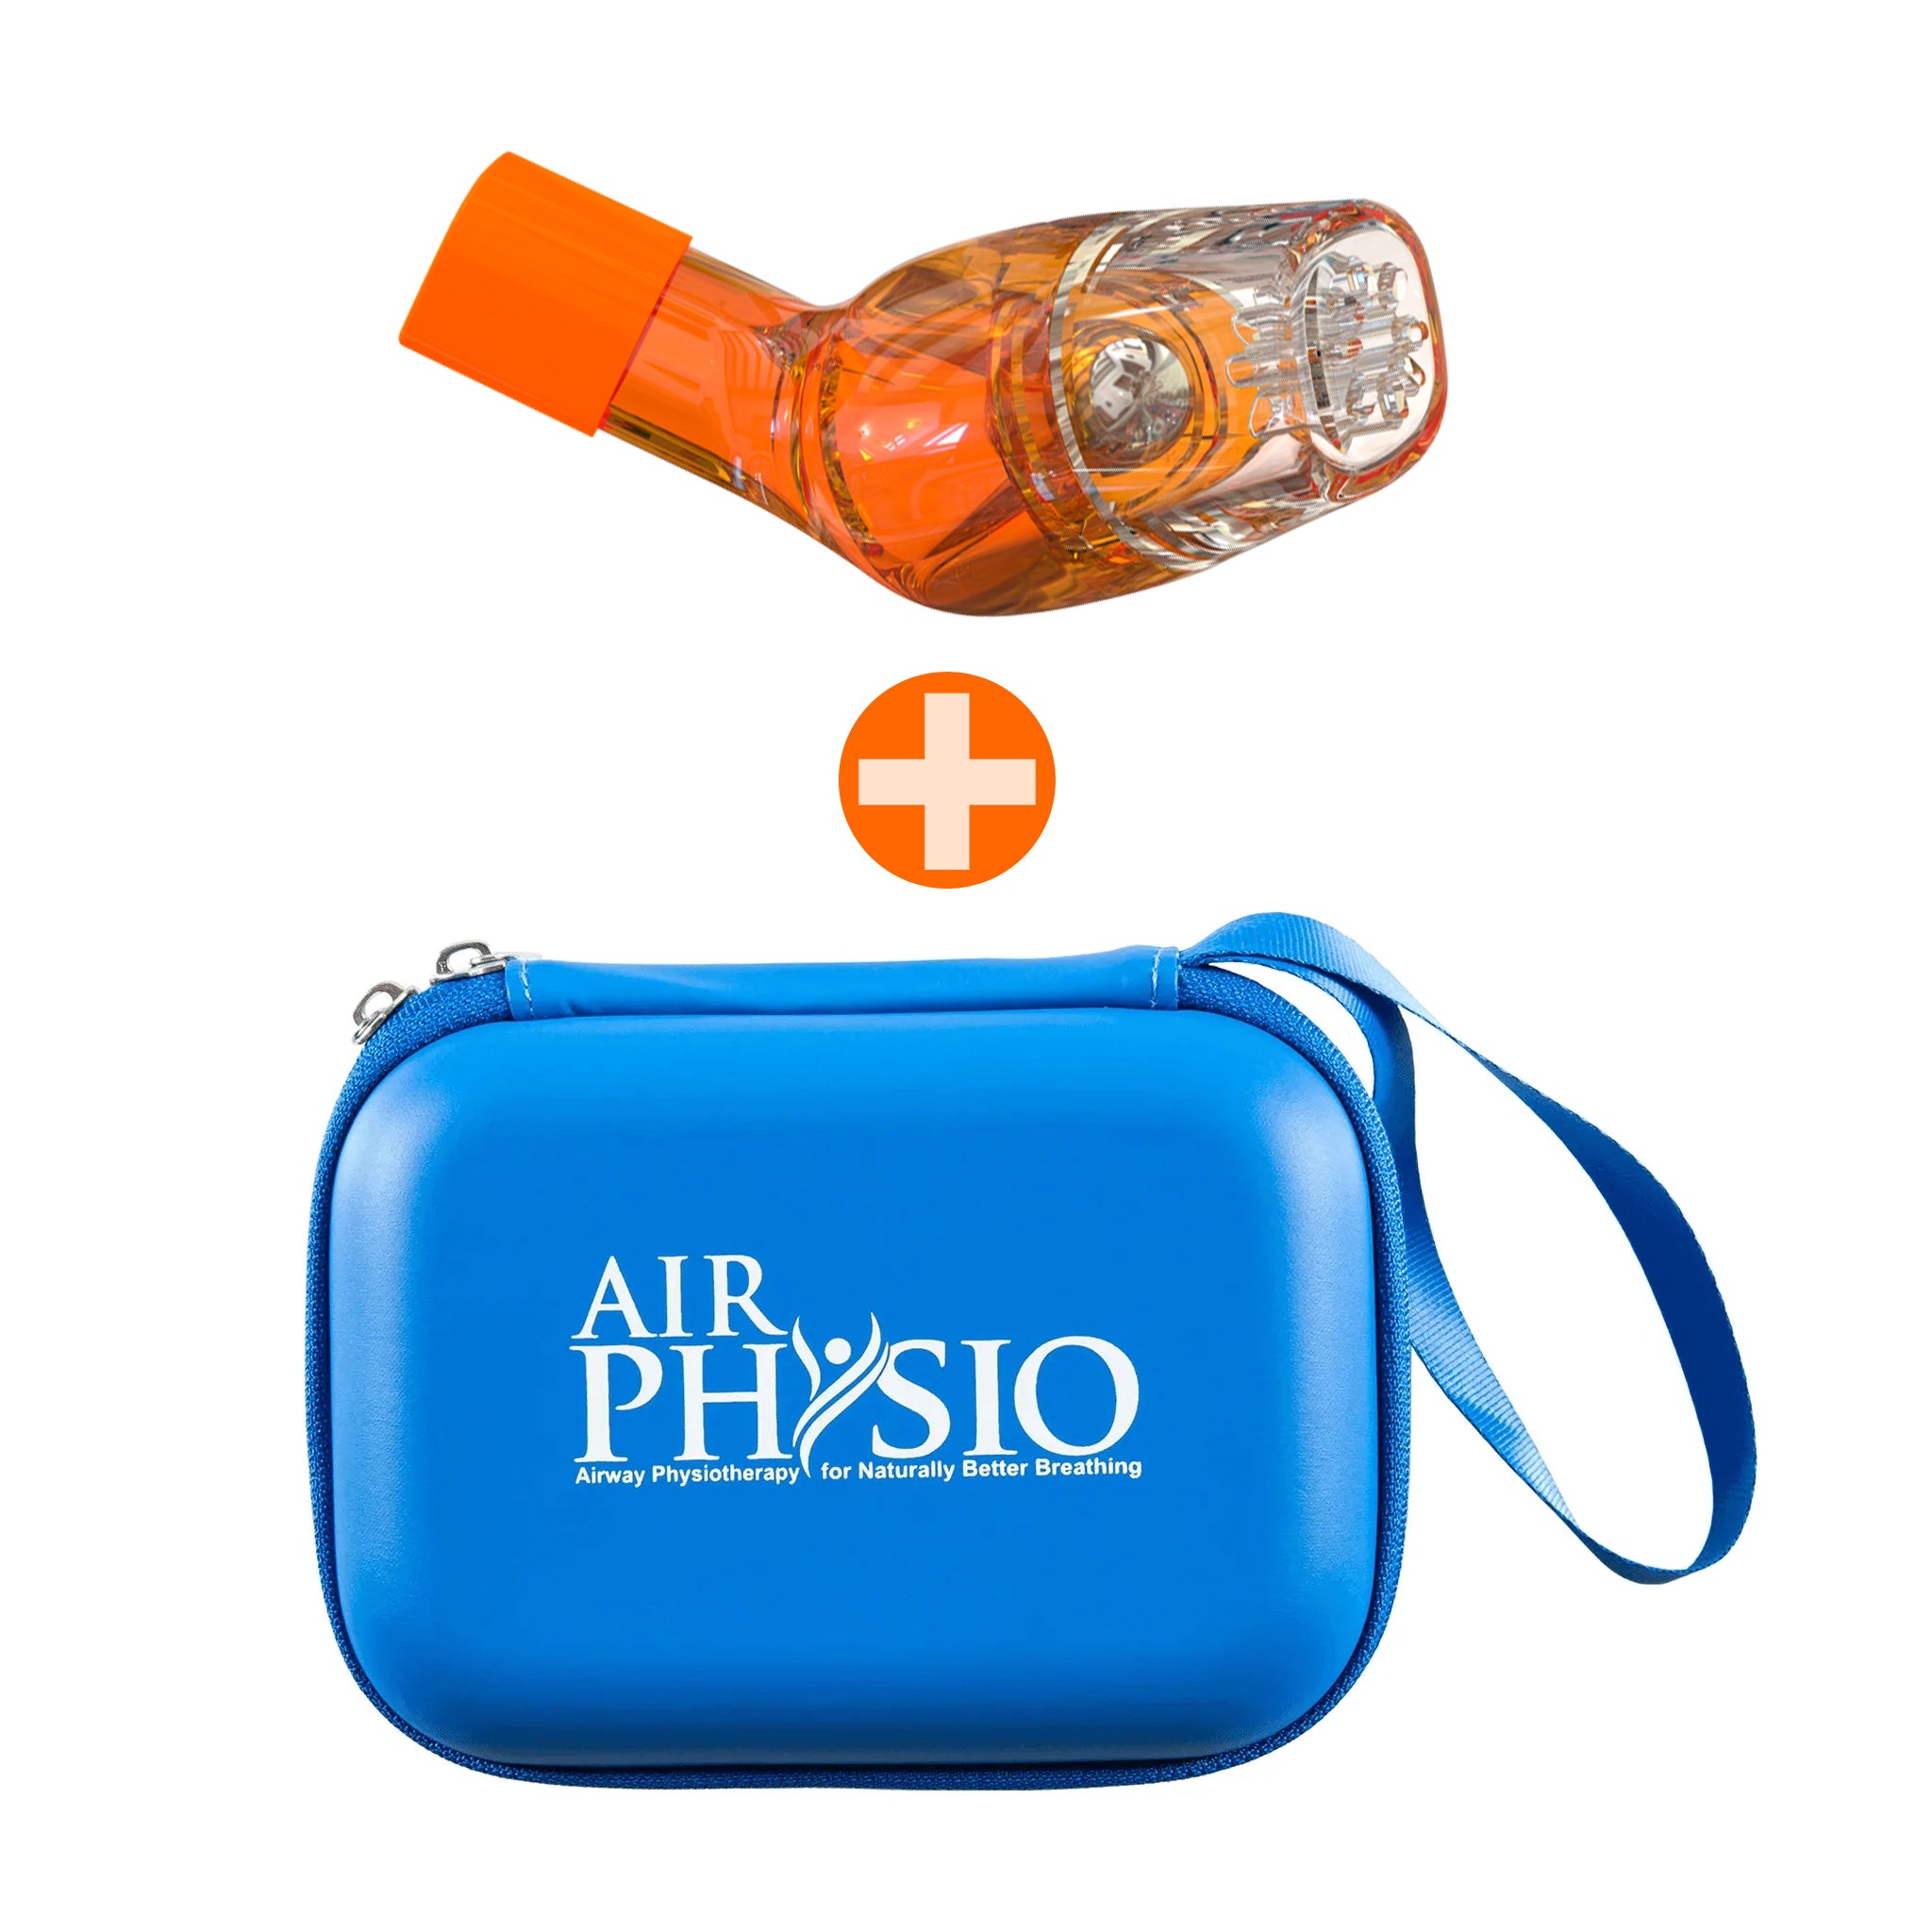 AirPhysio Mucus Clearance Device